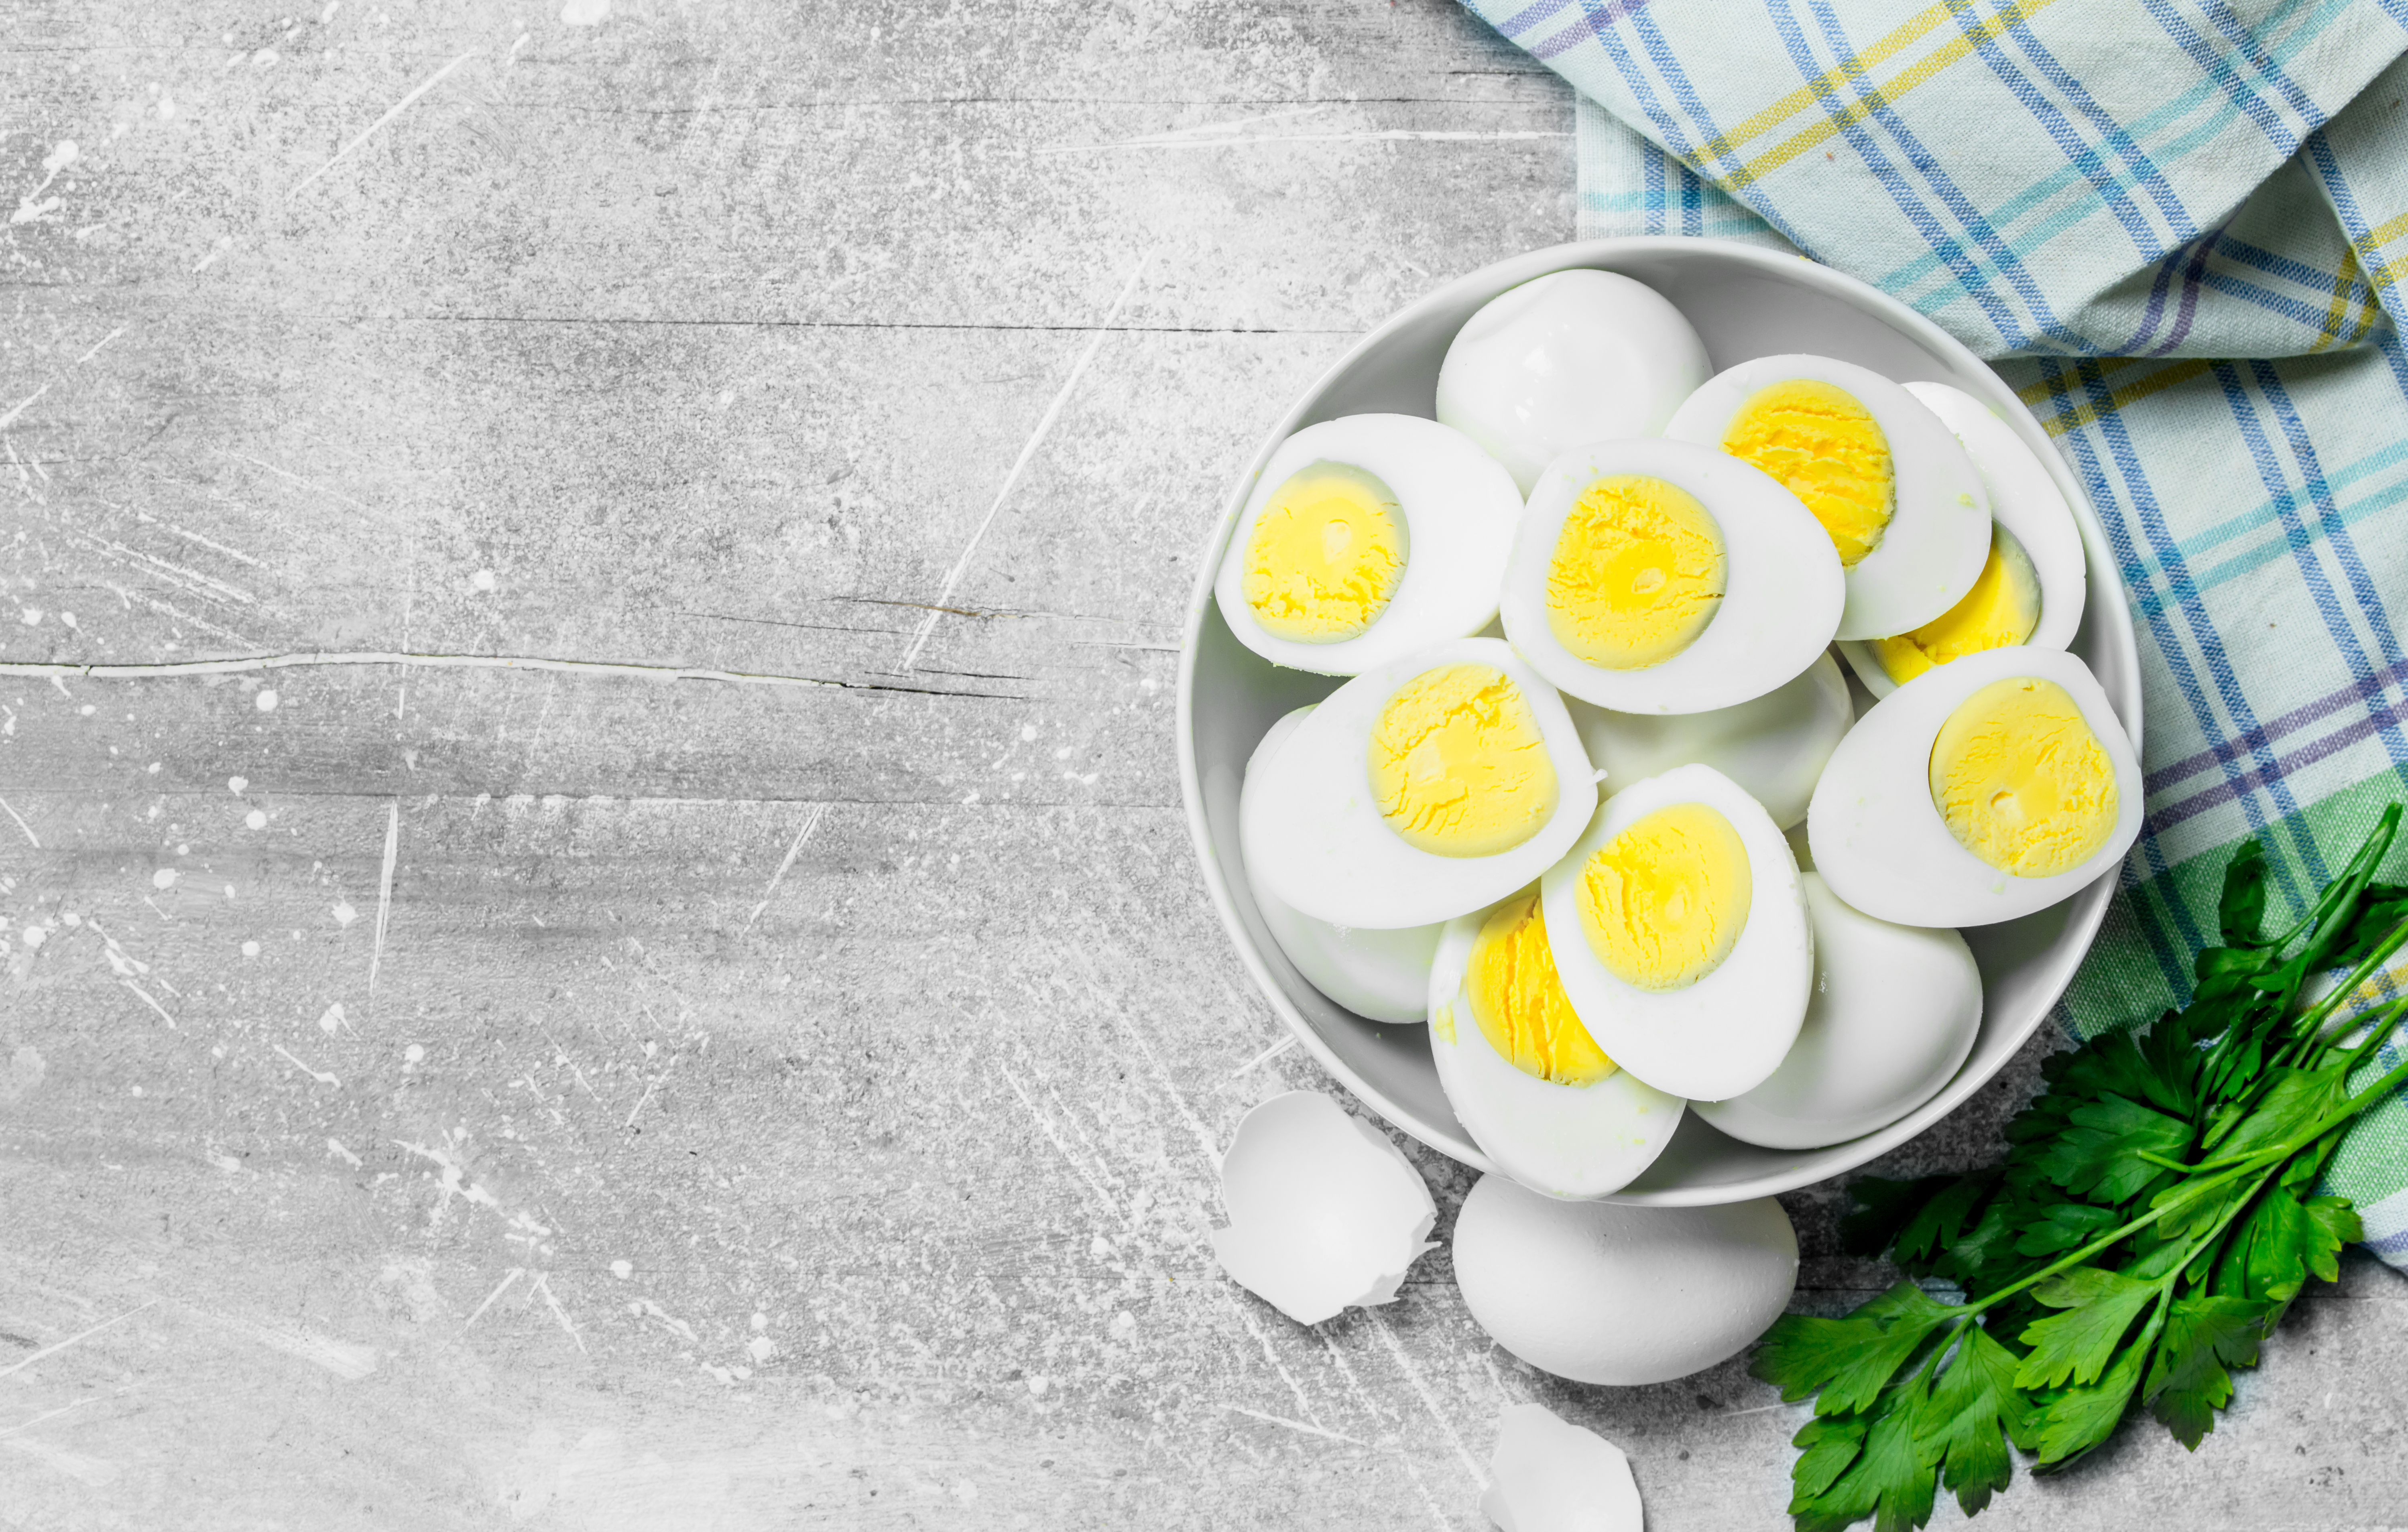 11 Facts You Should Know About Hard-Boiled Eggs